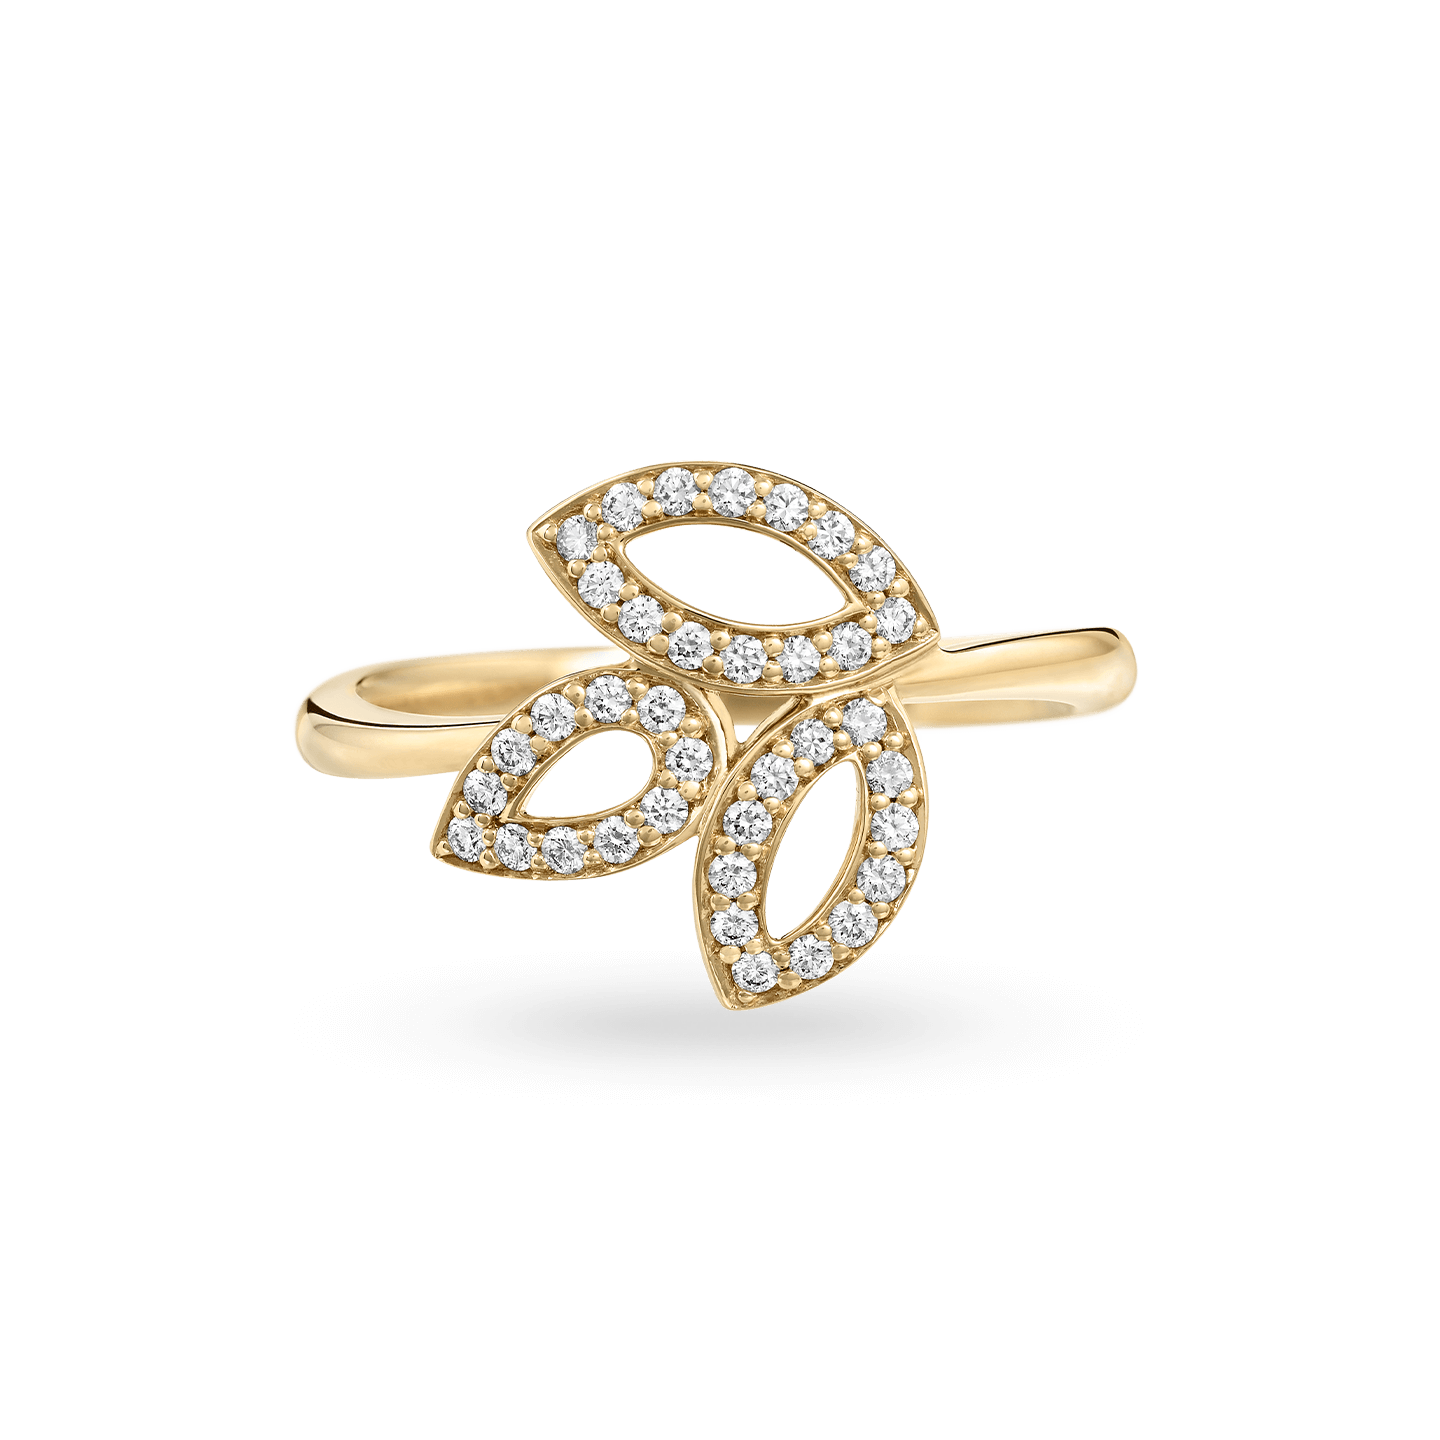 Lily Cluster Diamond Ring in Yellow Gold, Product Image 1